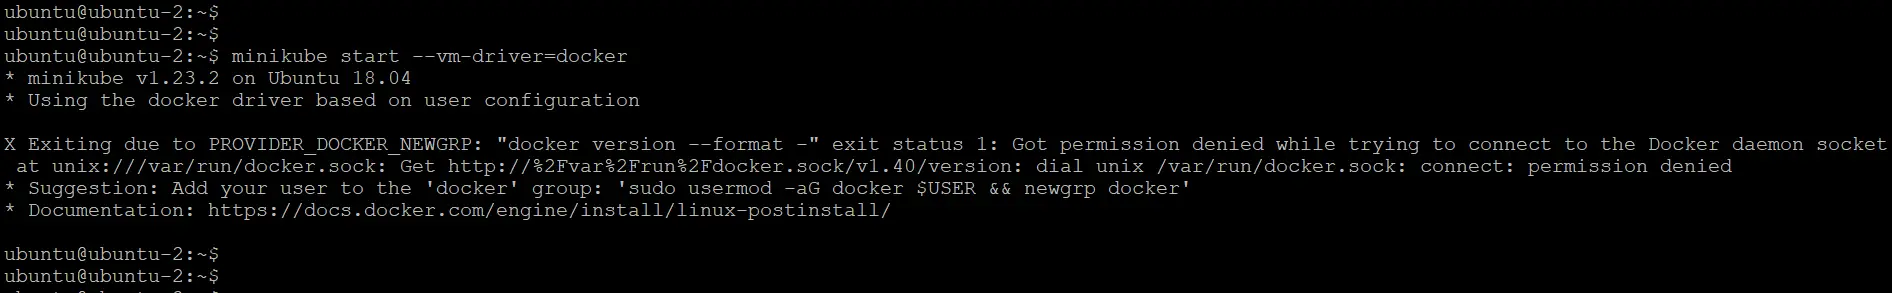 minikube start with docker driver but failed since this user is not added in docker group